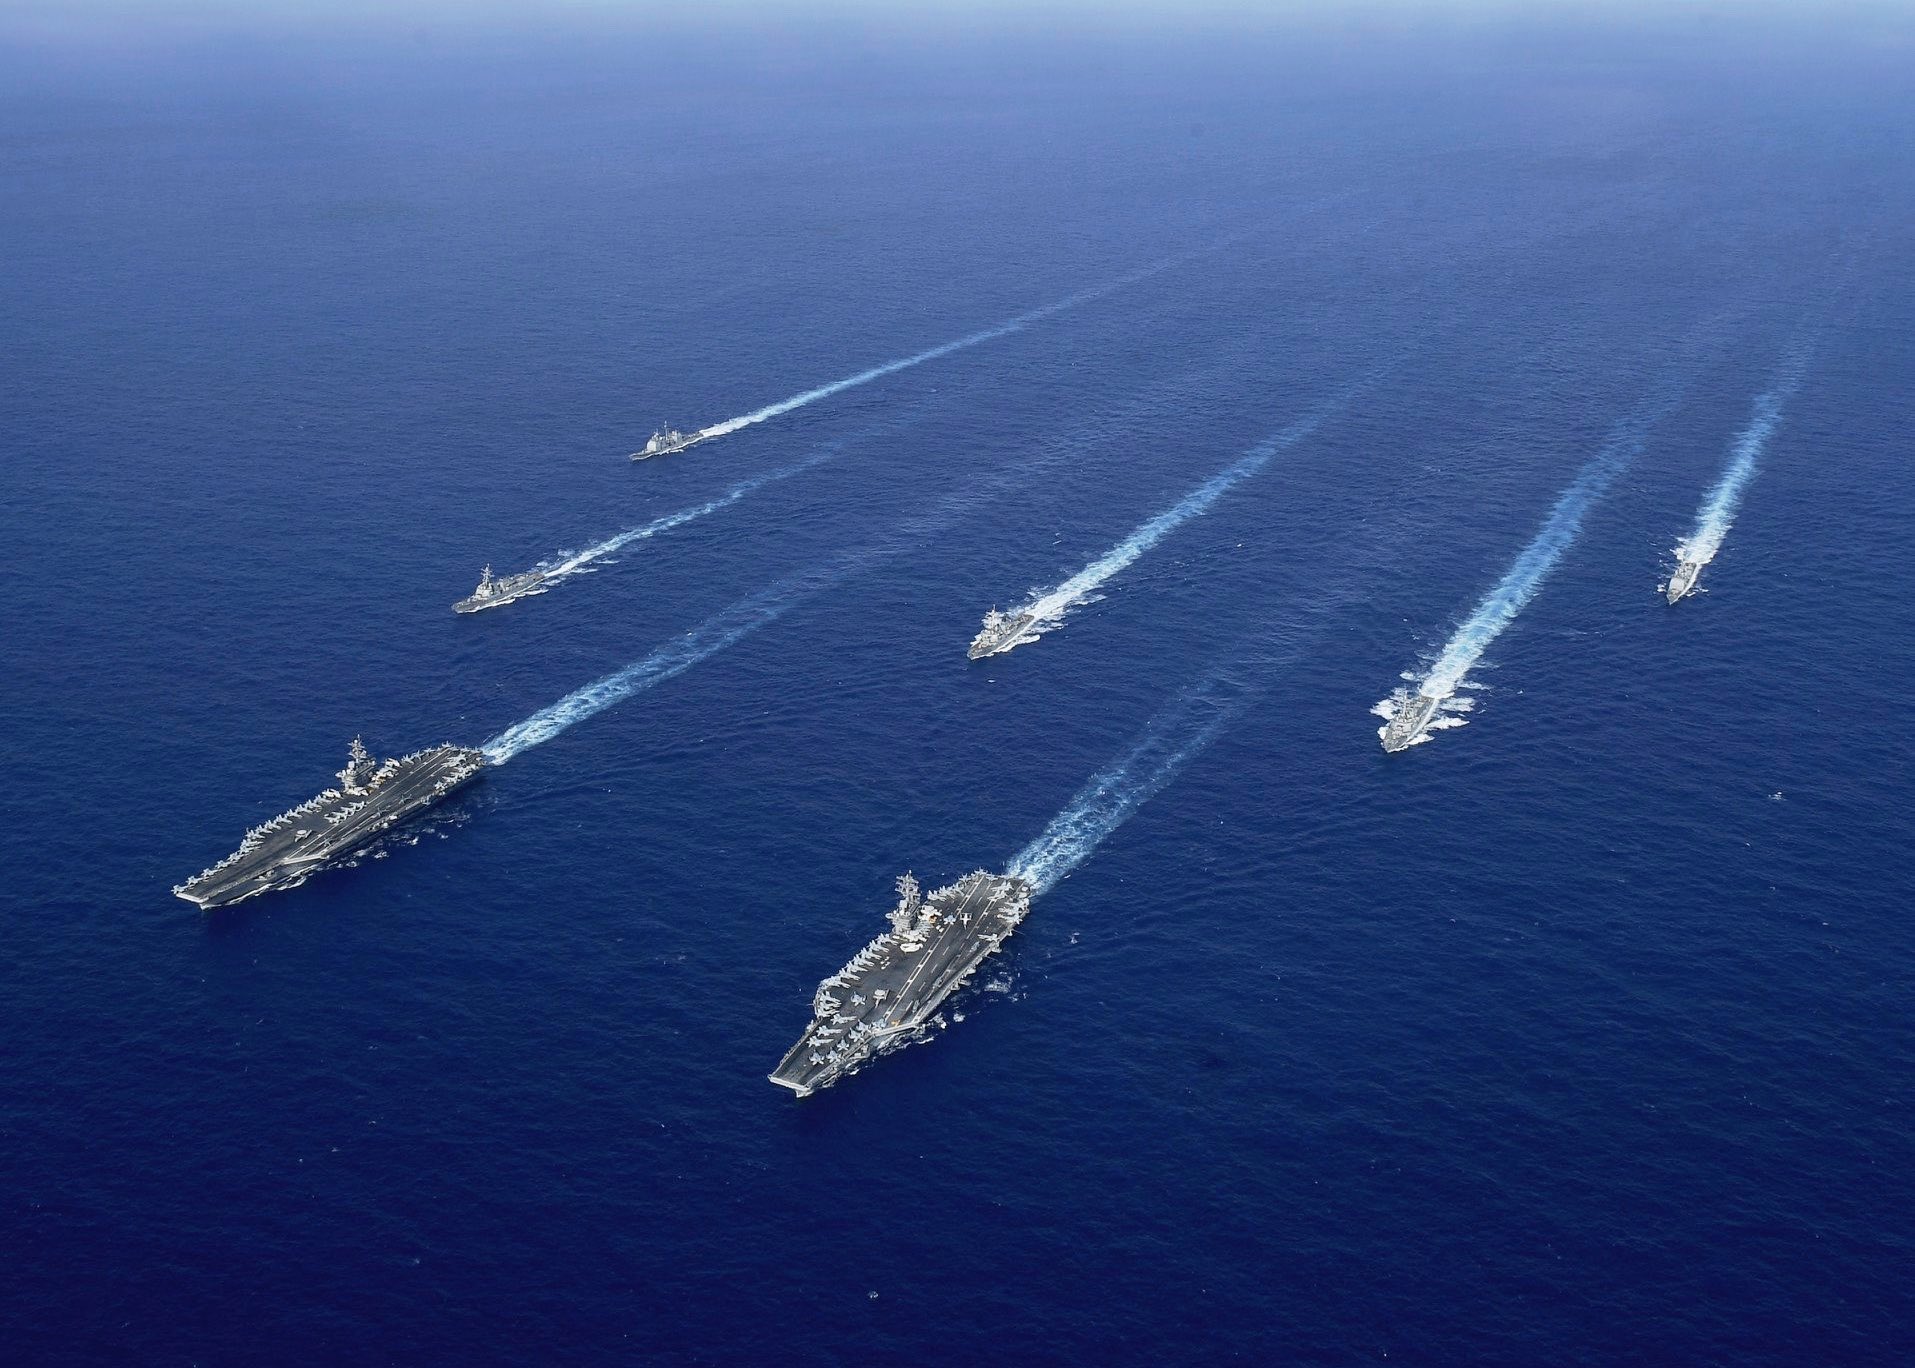 US warships in the South China Sea